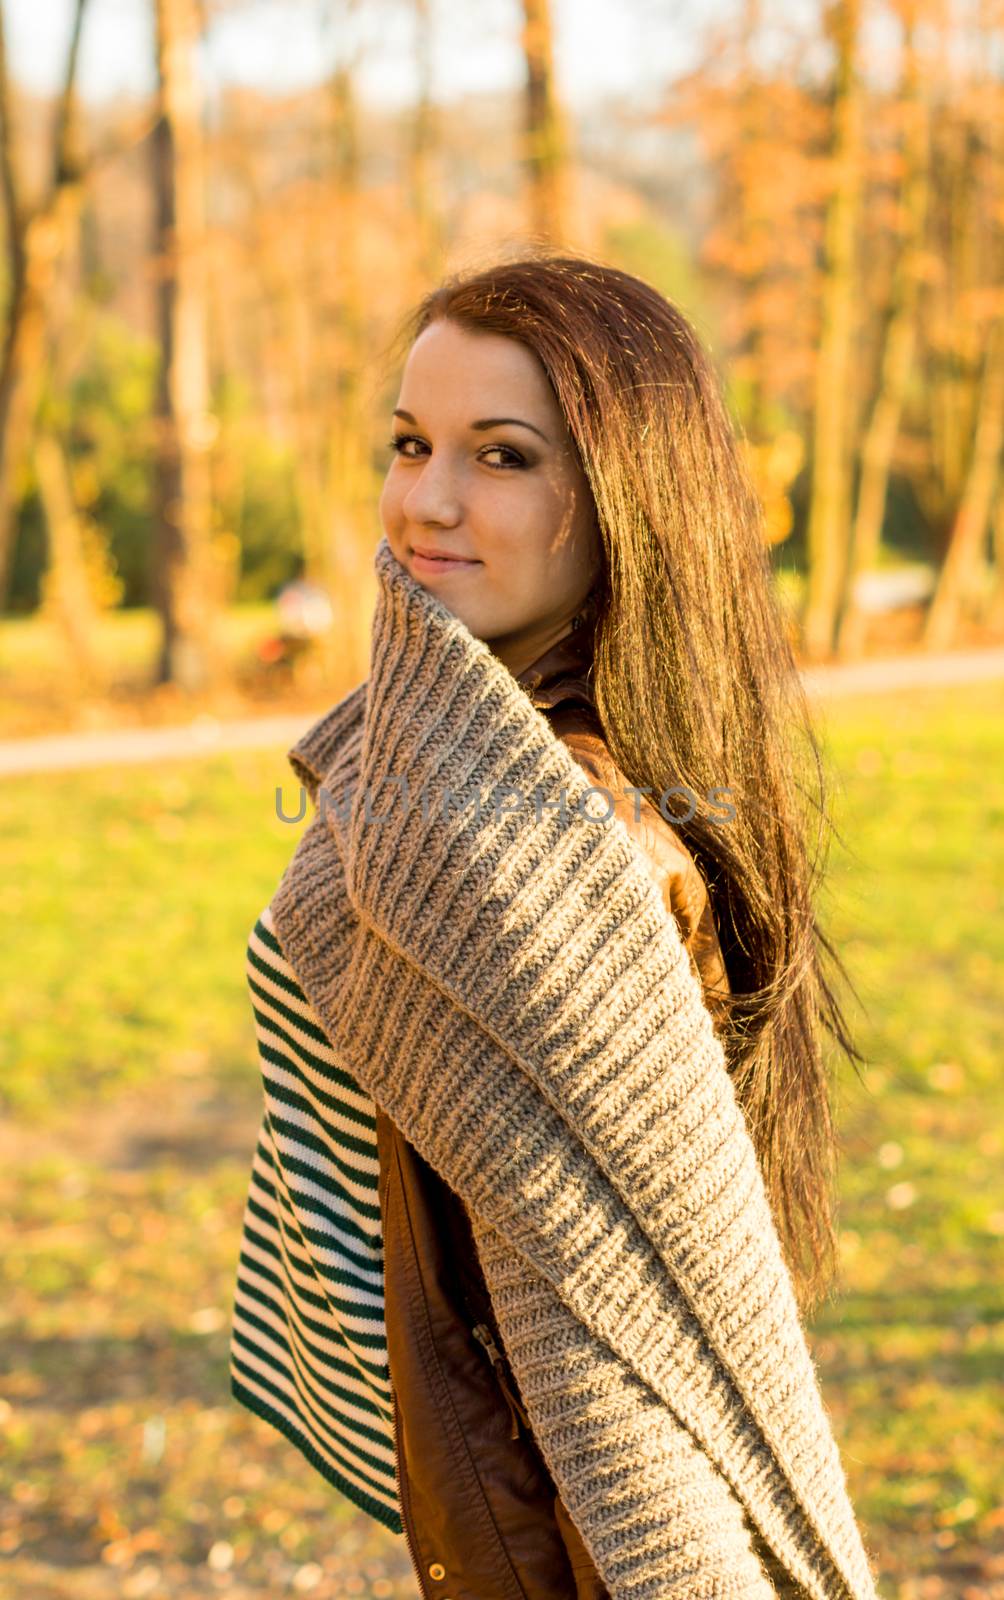 Young pretty woman in autumn park. For your commercial and editorial use.